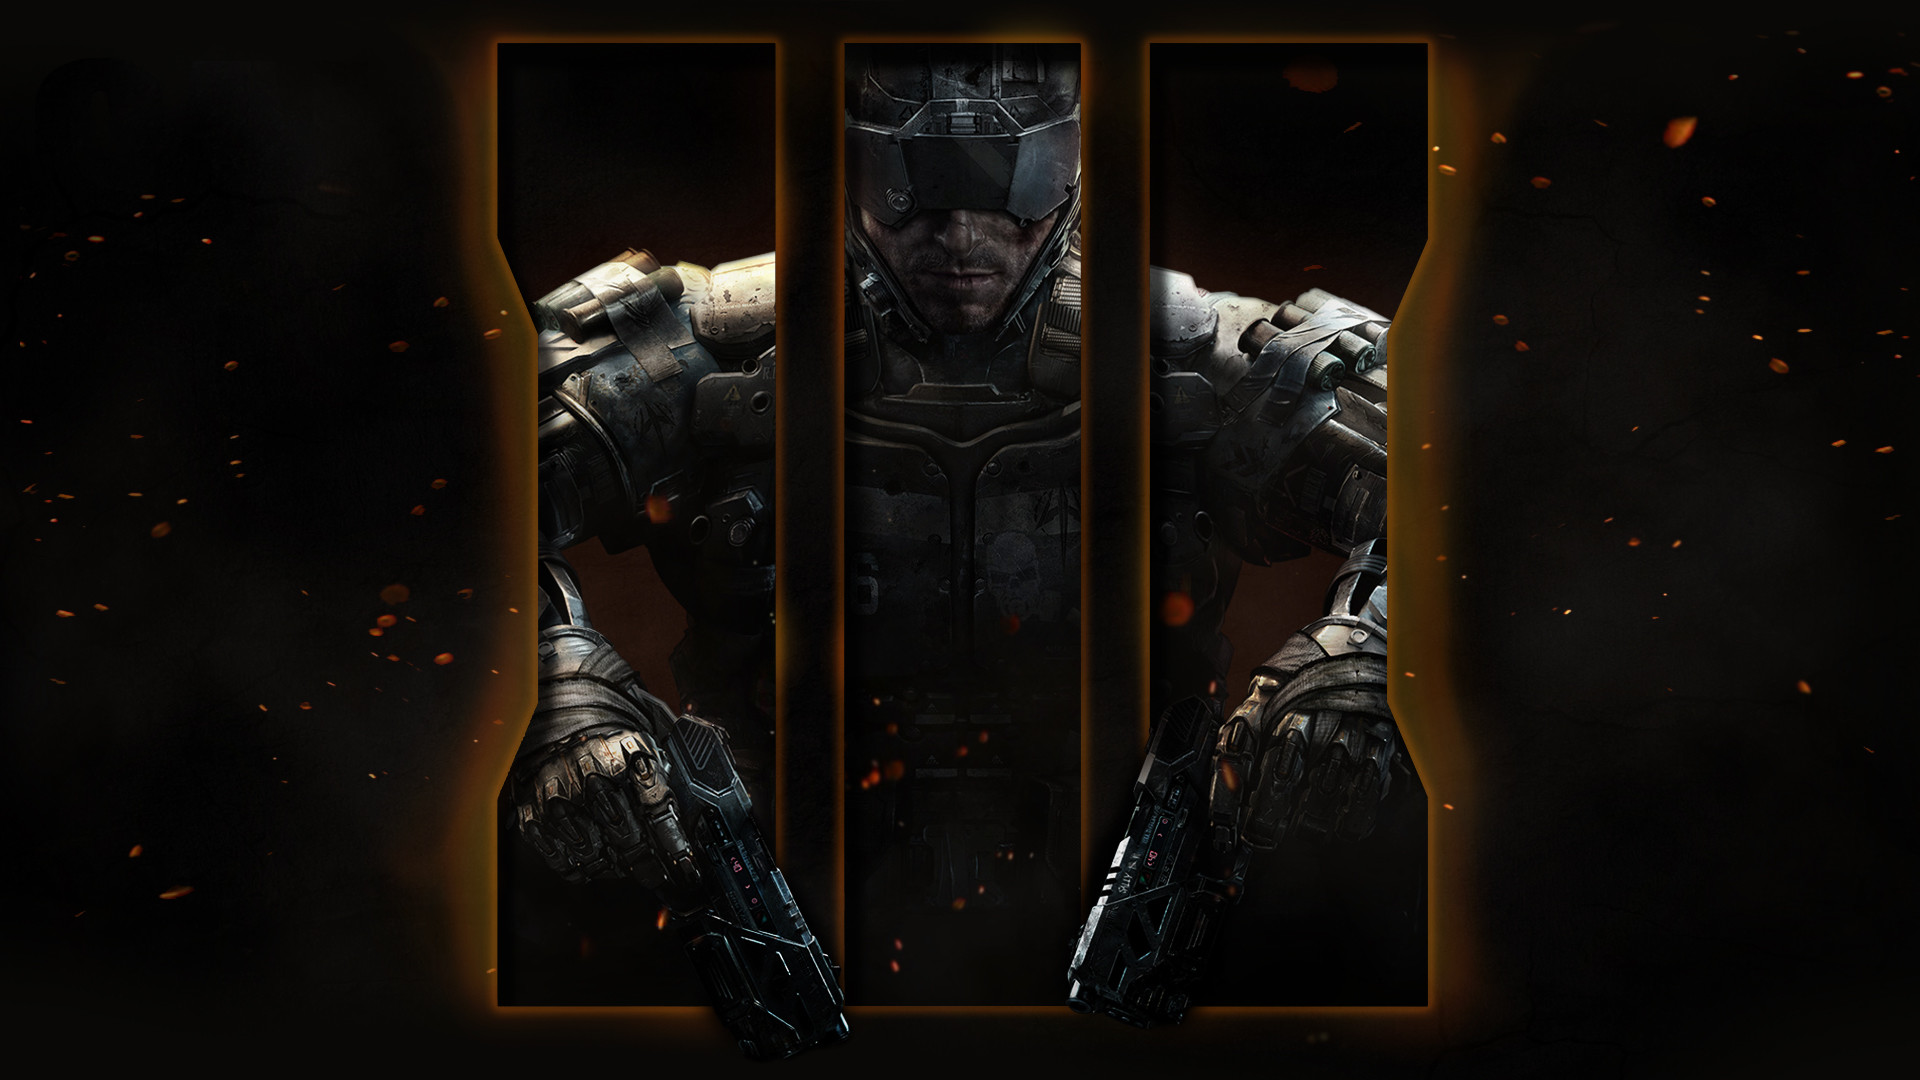 1920x1080 Call of Duty: Black Ops 3 Wallpaper 04 by Toby-Affenbude